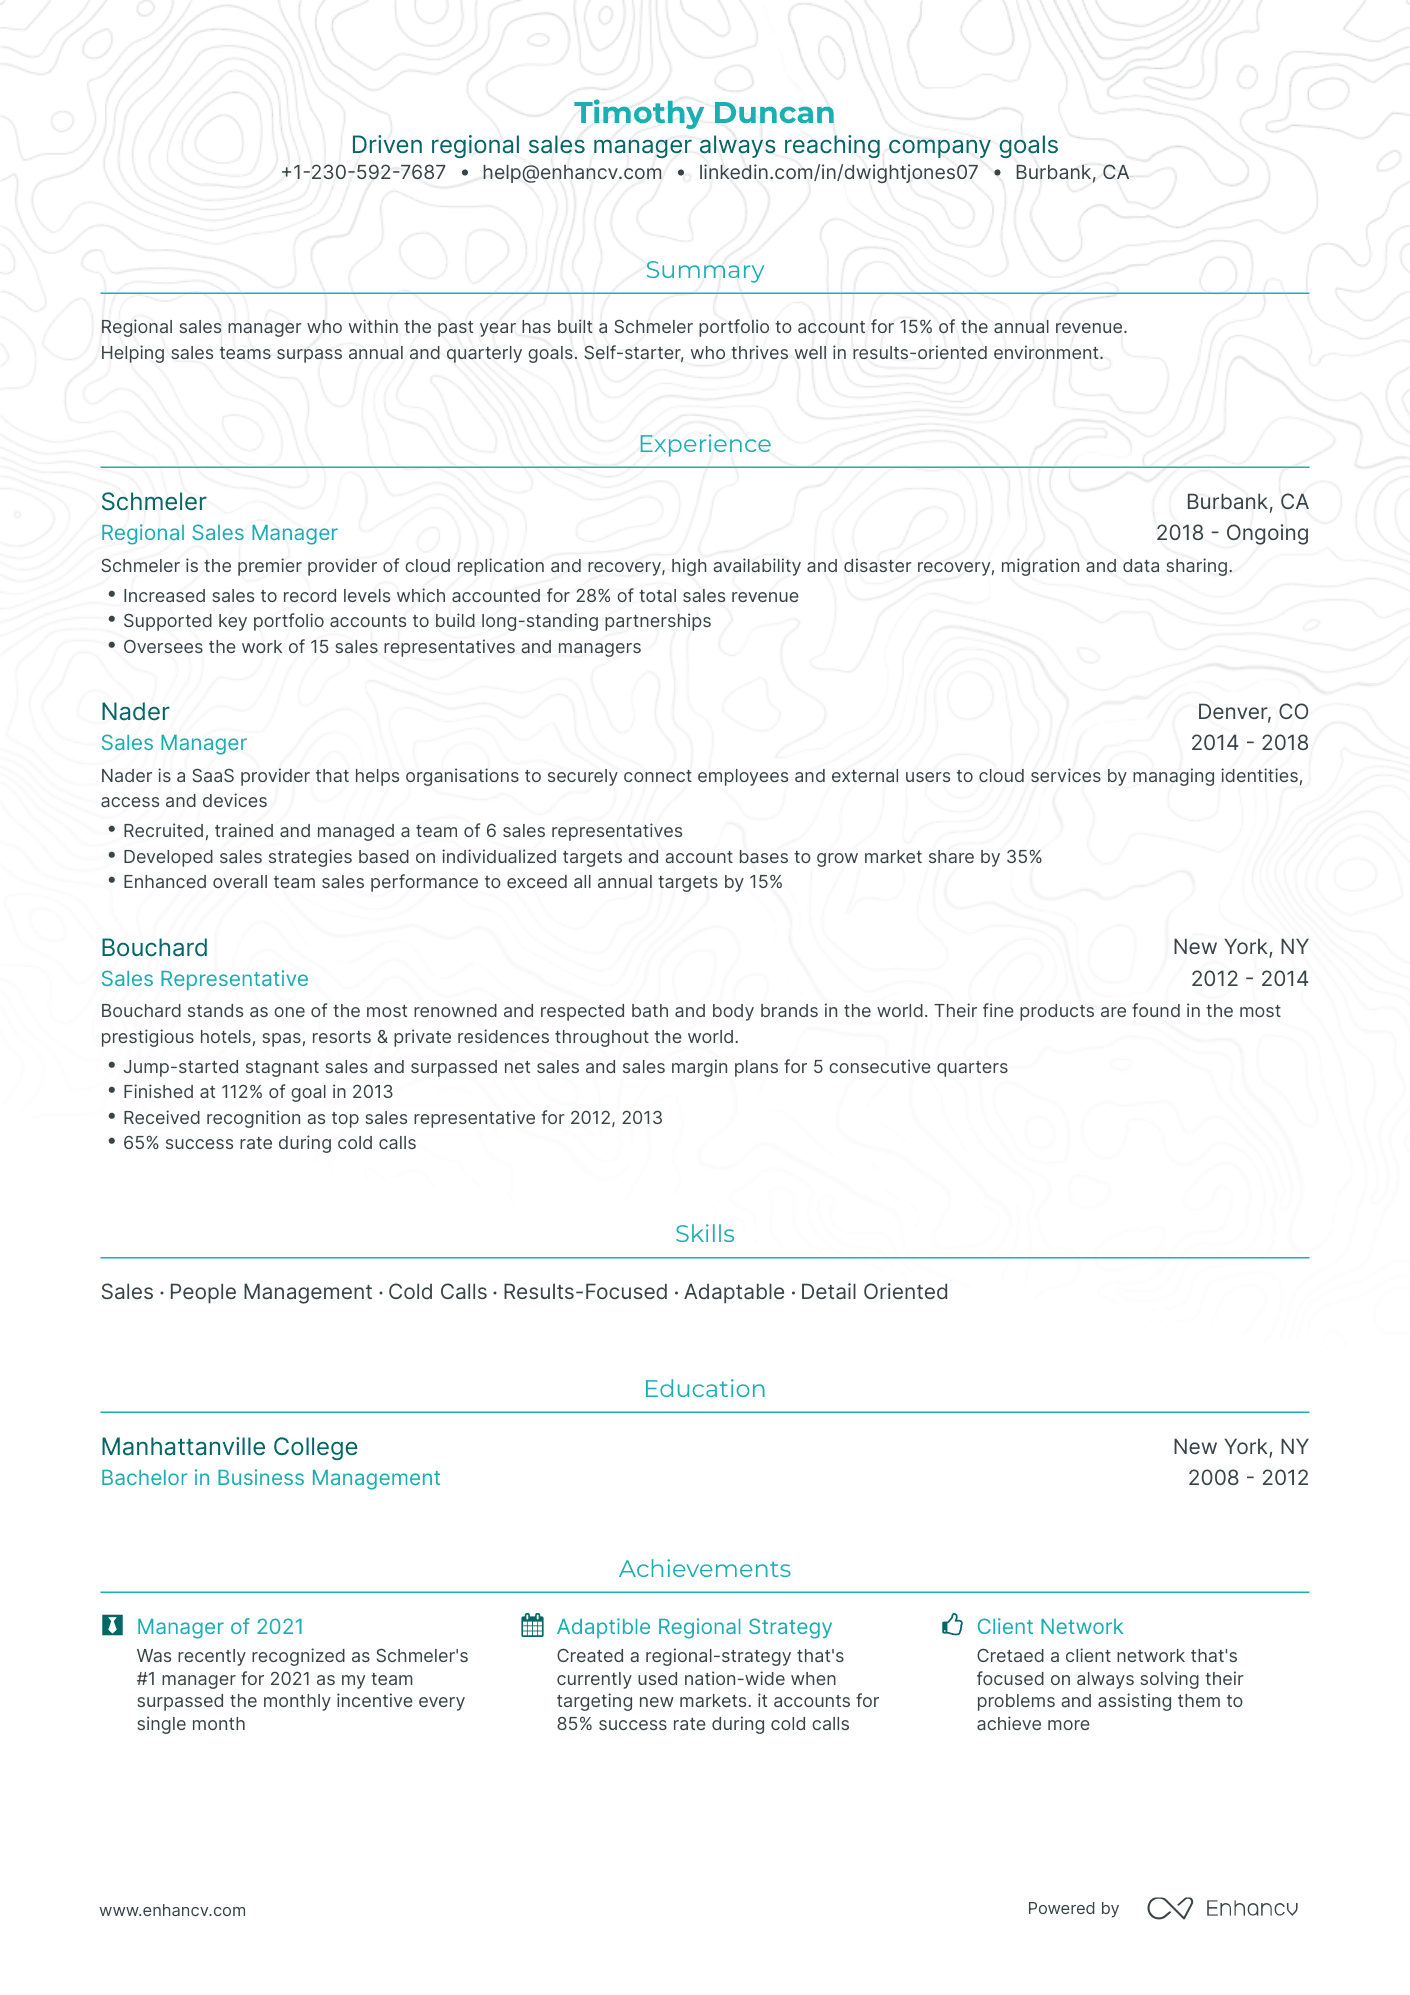 Traditional Regional Sales Manager Resume Template